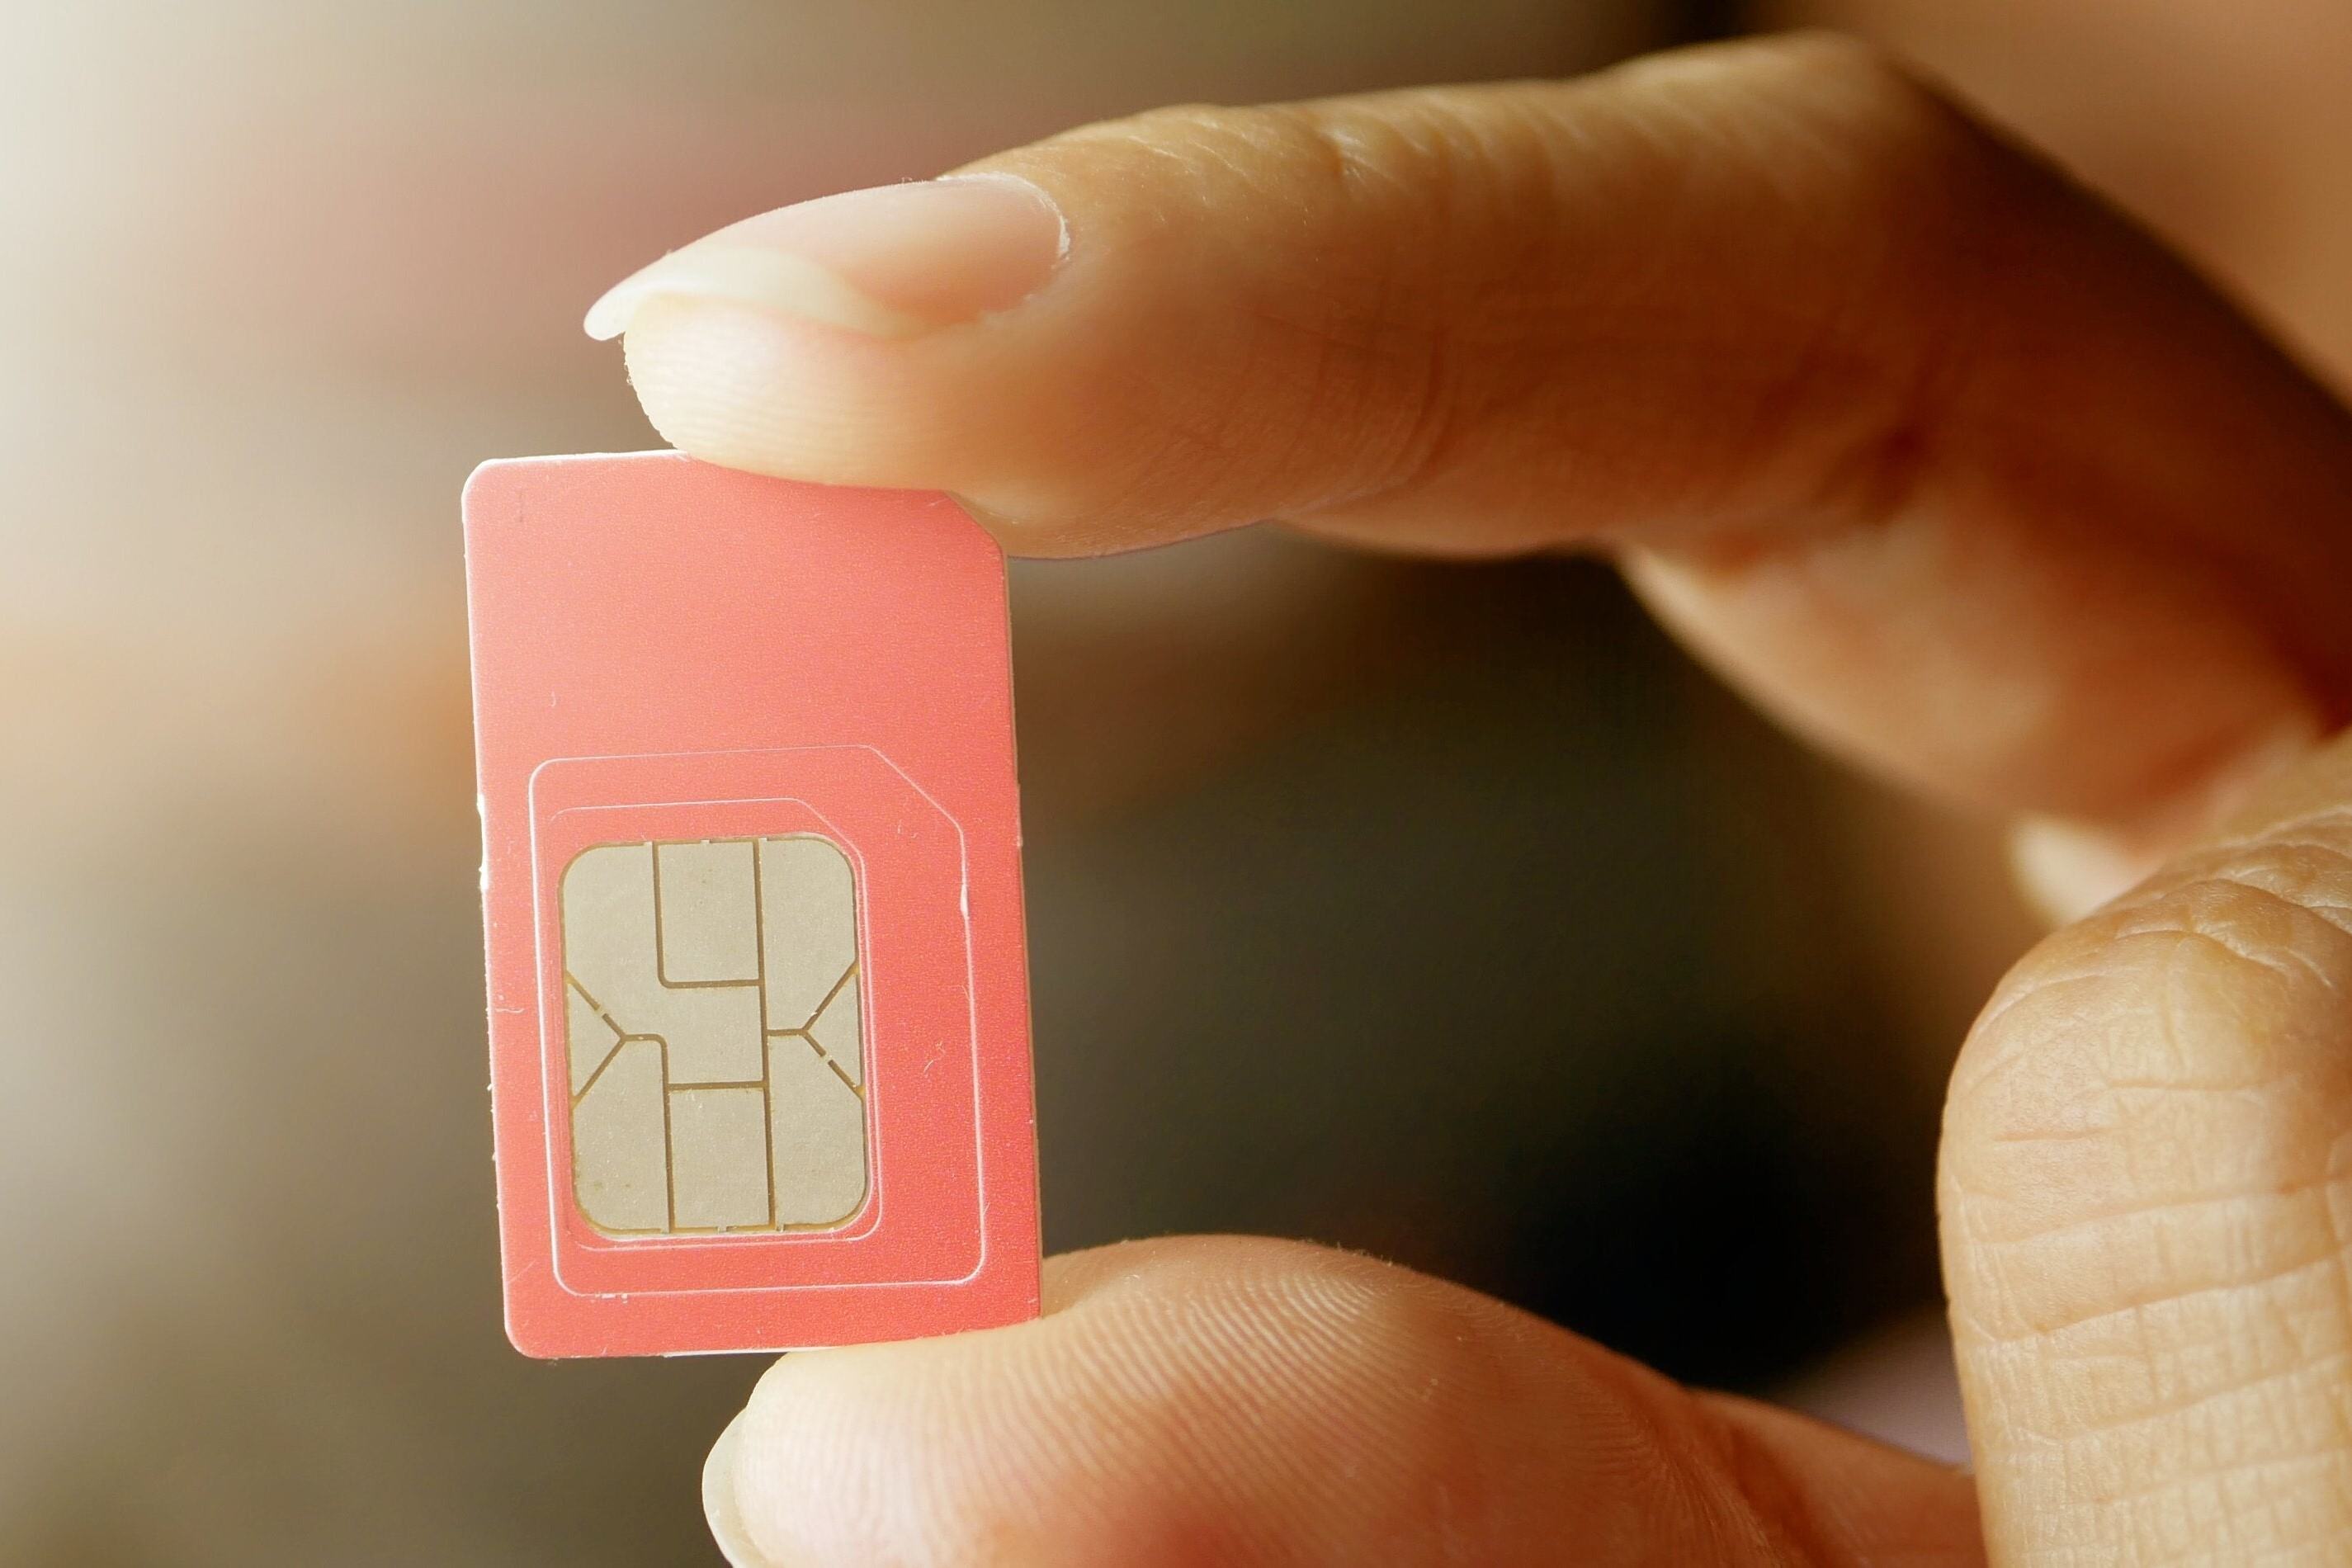 Choosing The Best SIM Card For Internet Use: Considerations